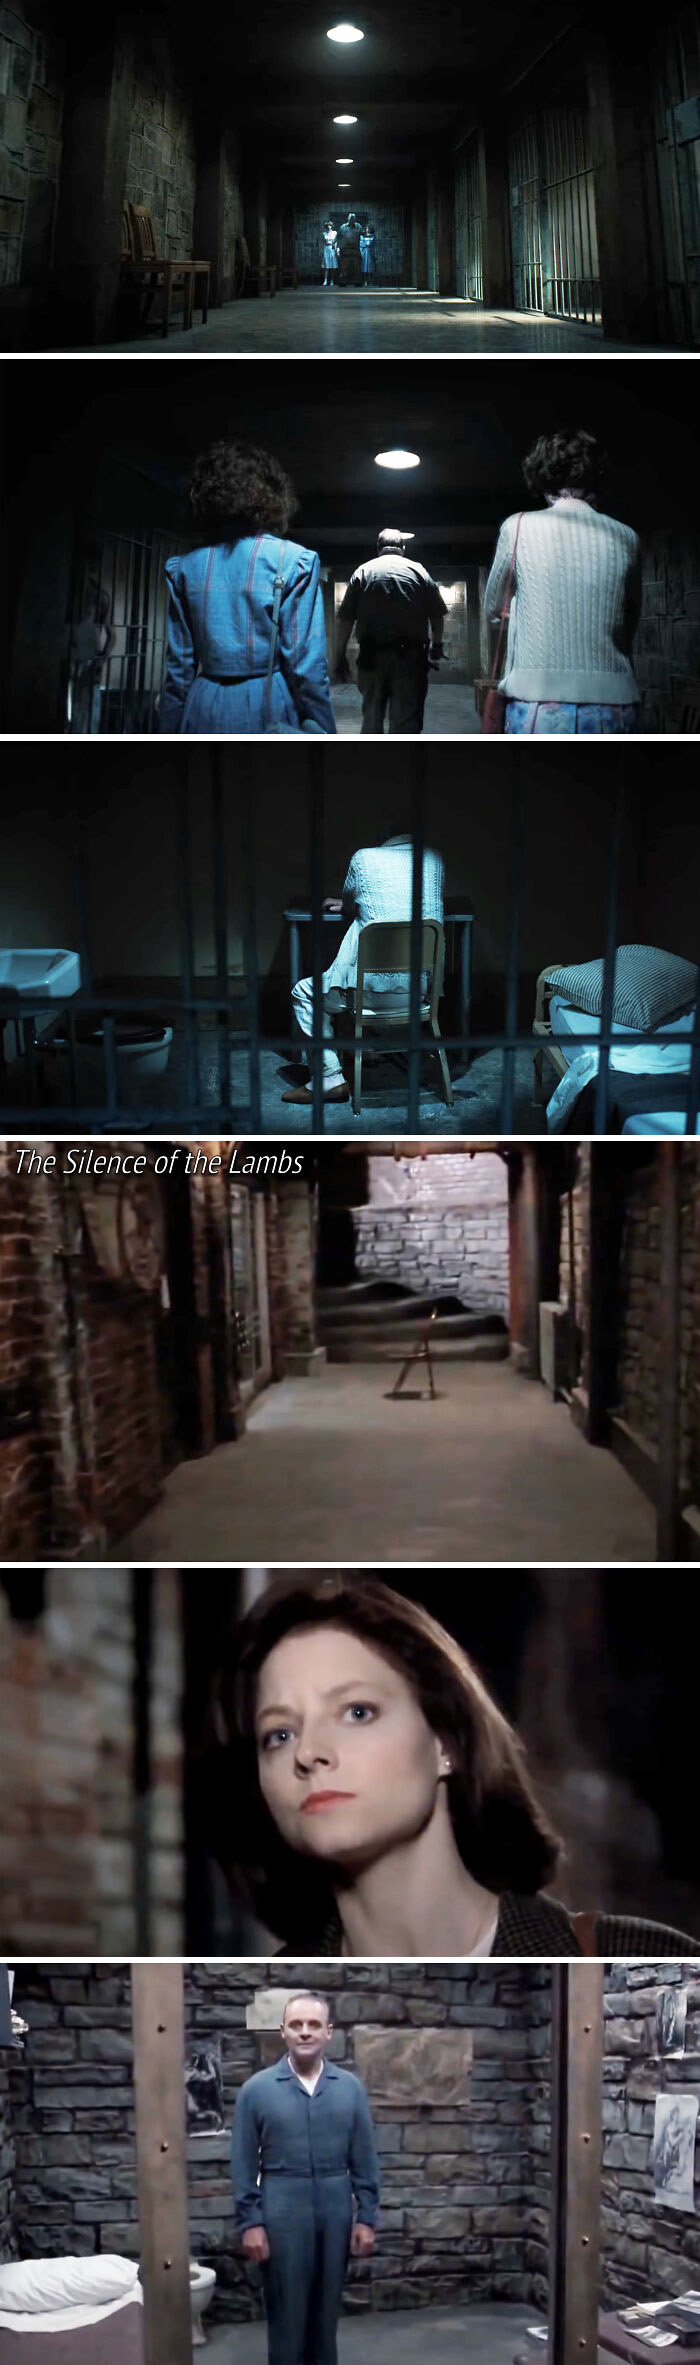 When Nancy And Robin Are Inside Pennhurst And Walk Down The Hallway To Victor Creel's Cell, It's A Nod To The Moment From The Silence Of The Lambs When Clarice Visits Hannibal Lecter For The First Time